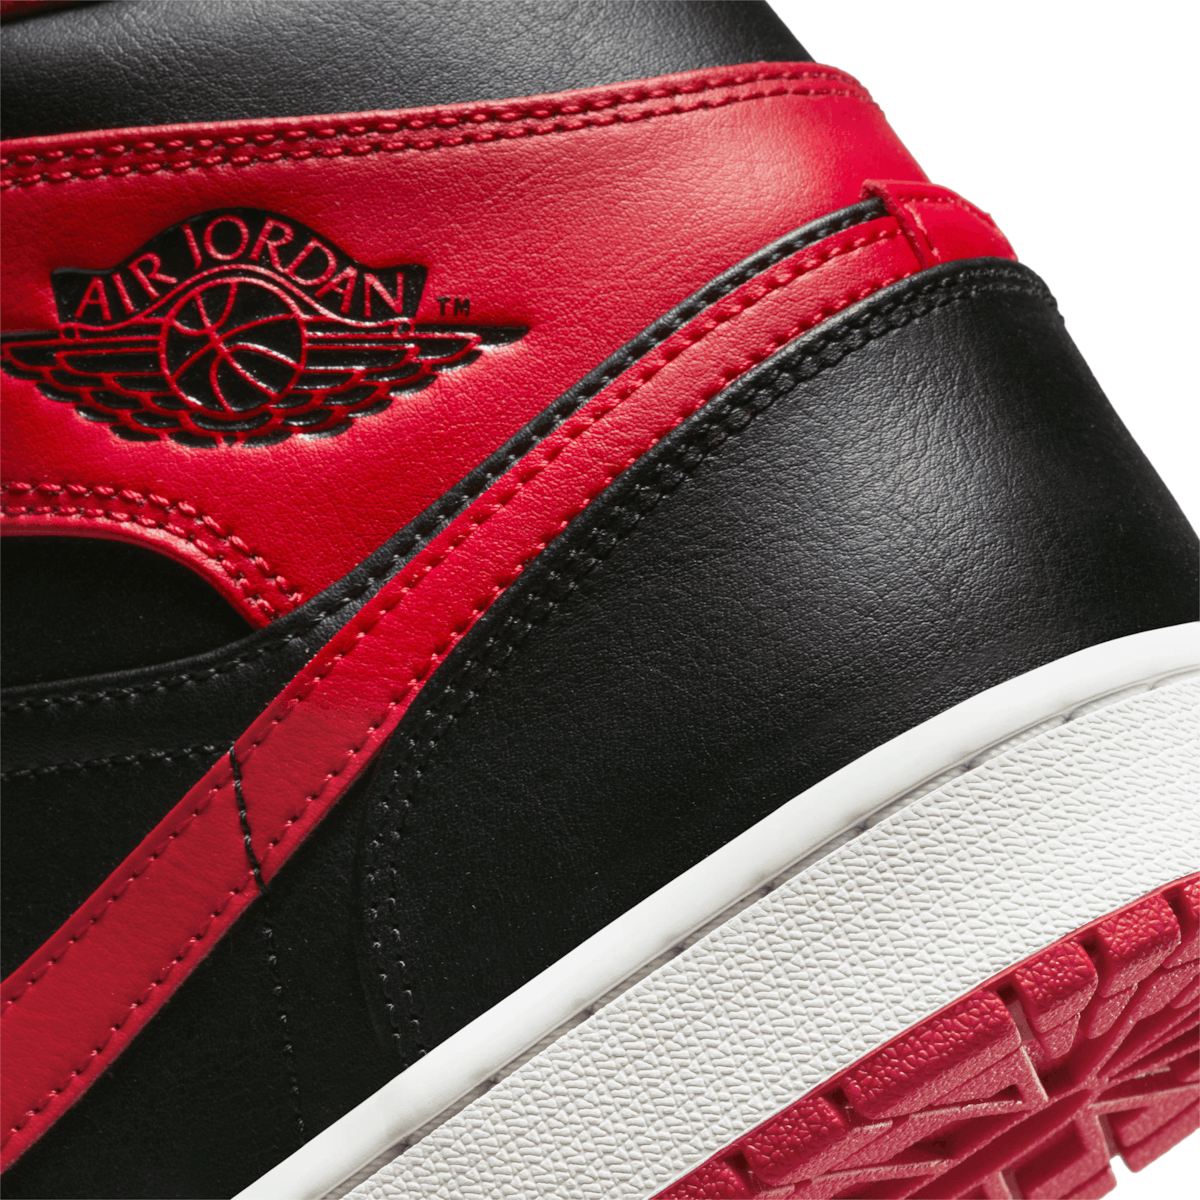 This Air Jordan 1 Mid References The Legendary Bred - Sneaker News